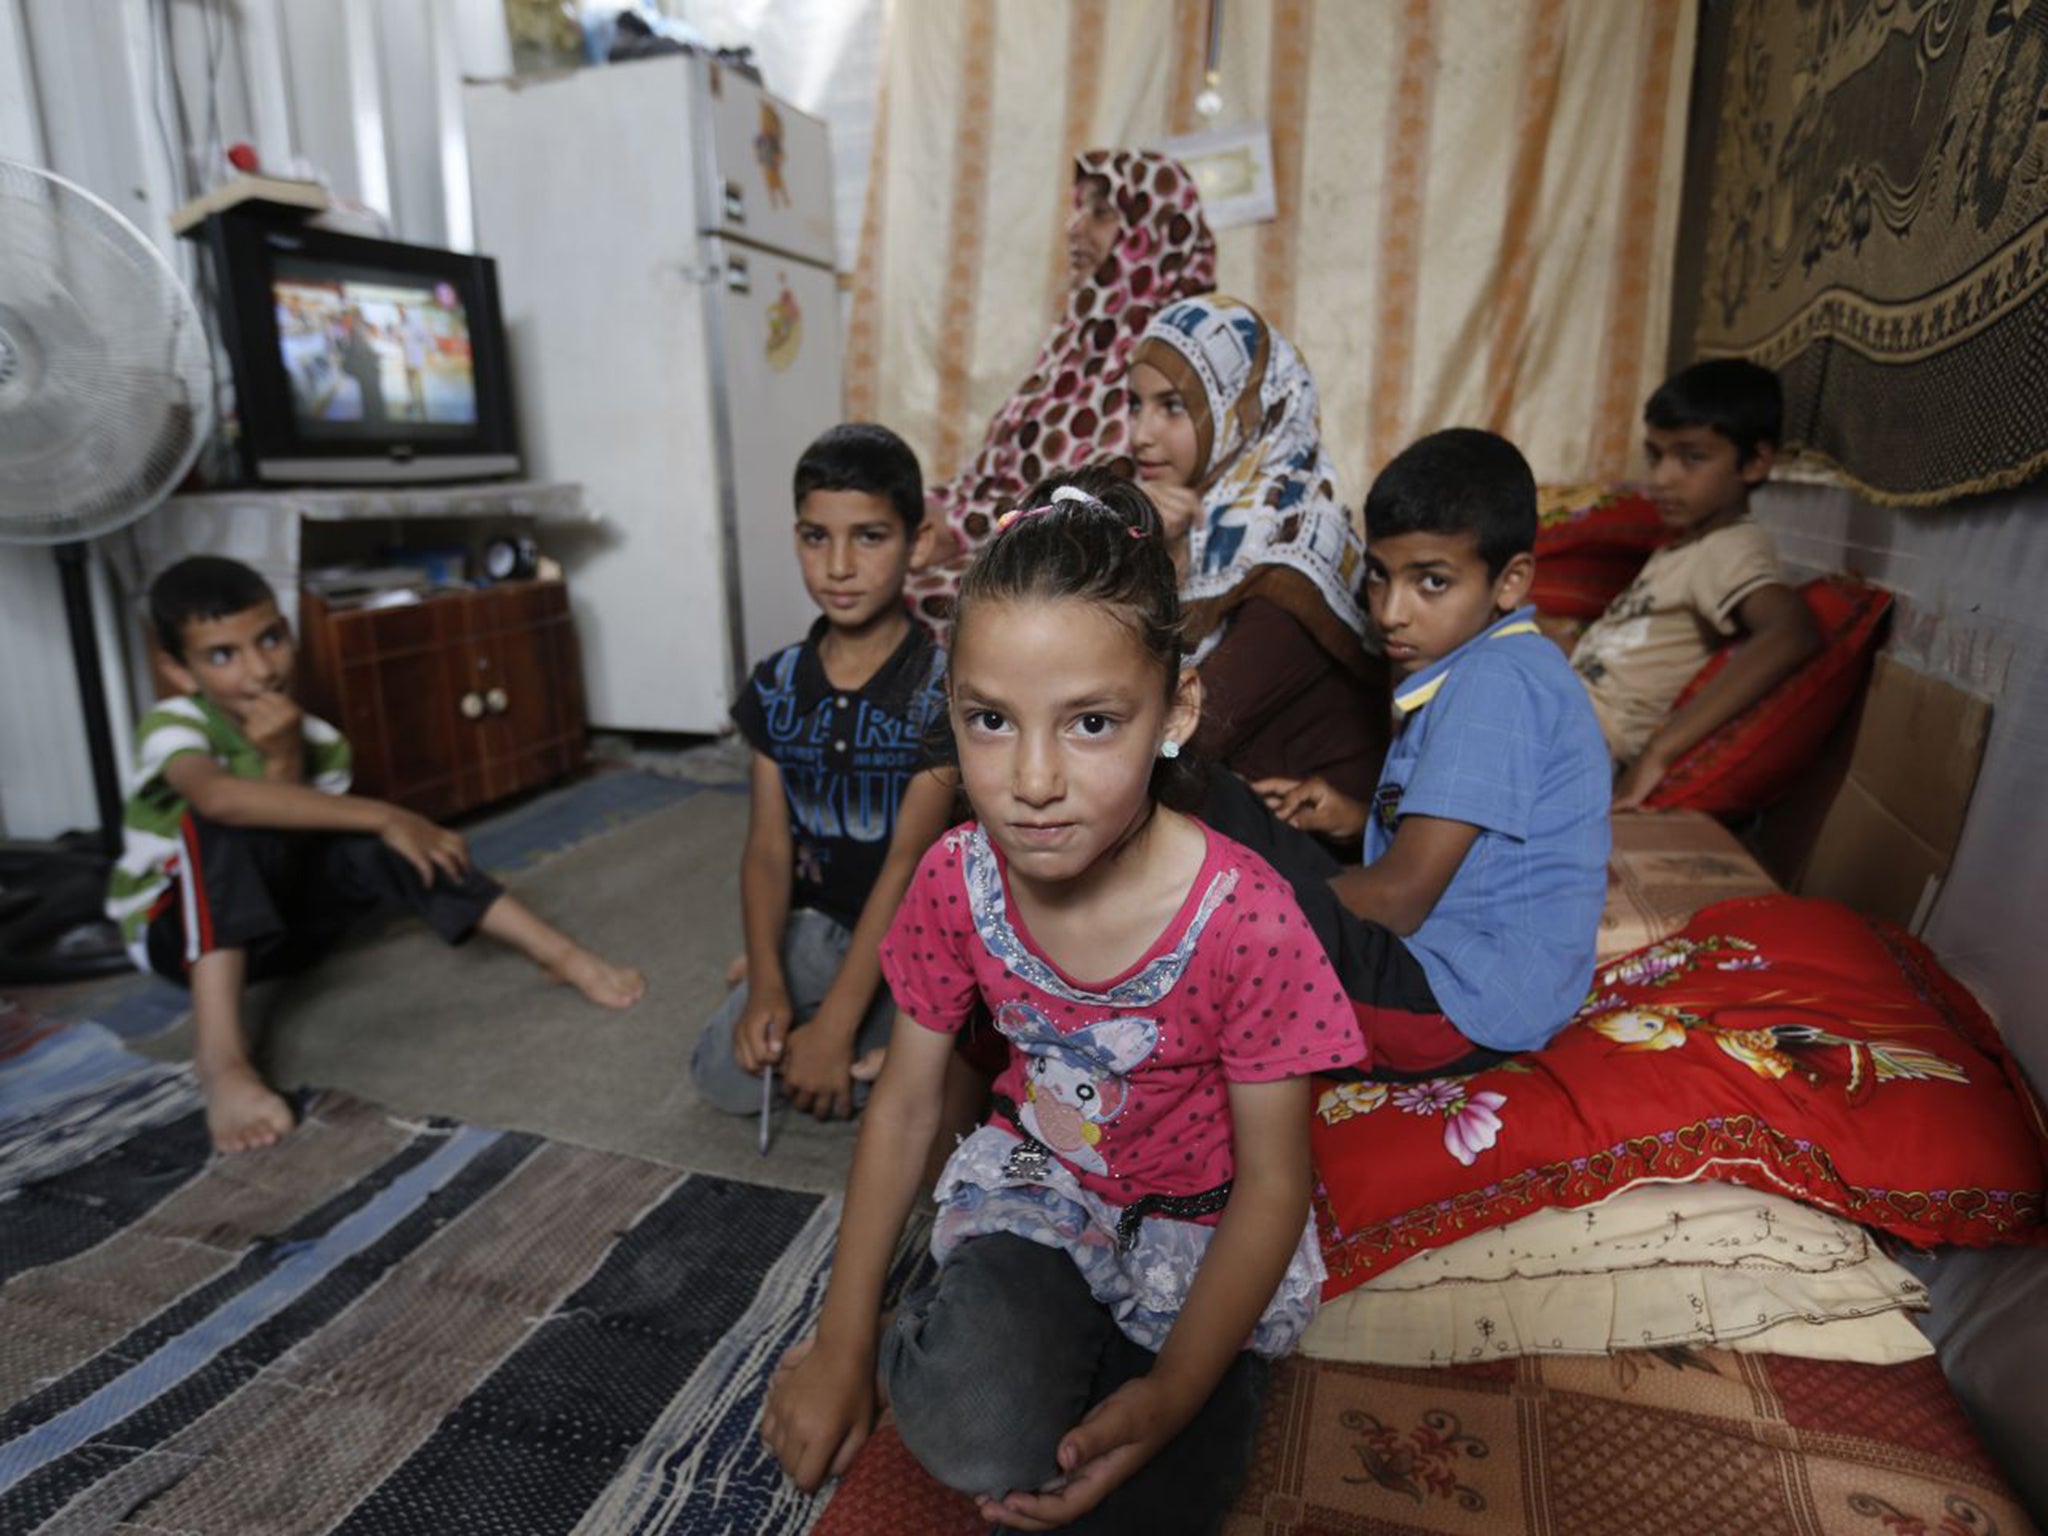 Ghaida al-Najjar, eight, lives with her family in one of the caravans in Khuza’a, a town near Khan Younis, in the south of Gaza (